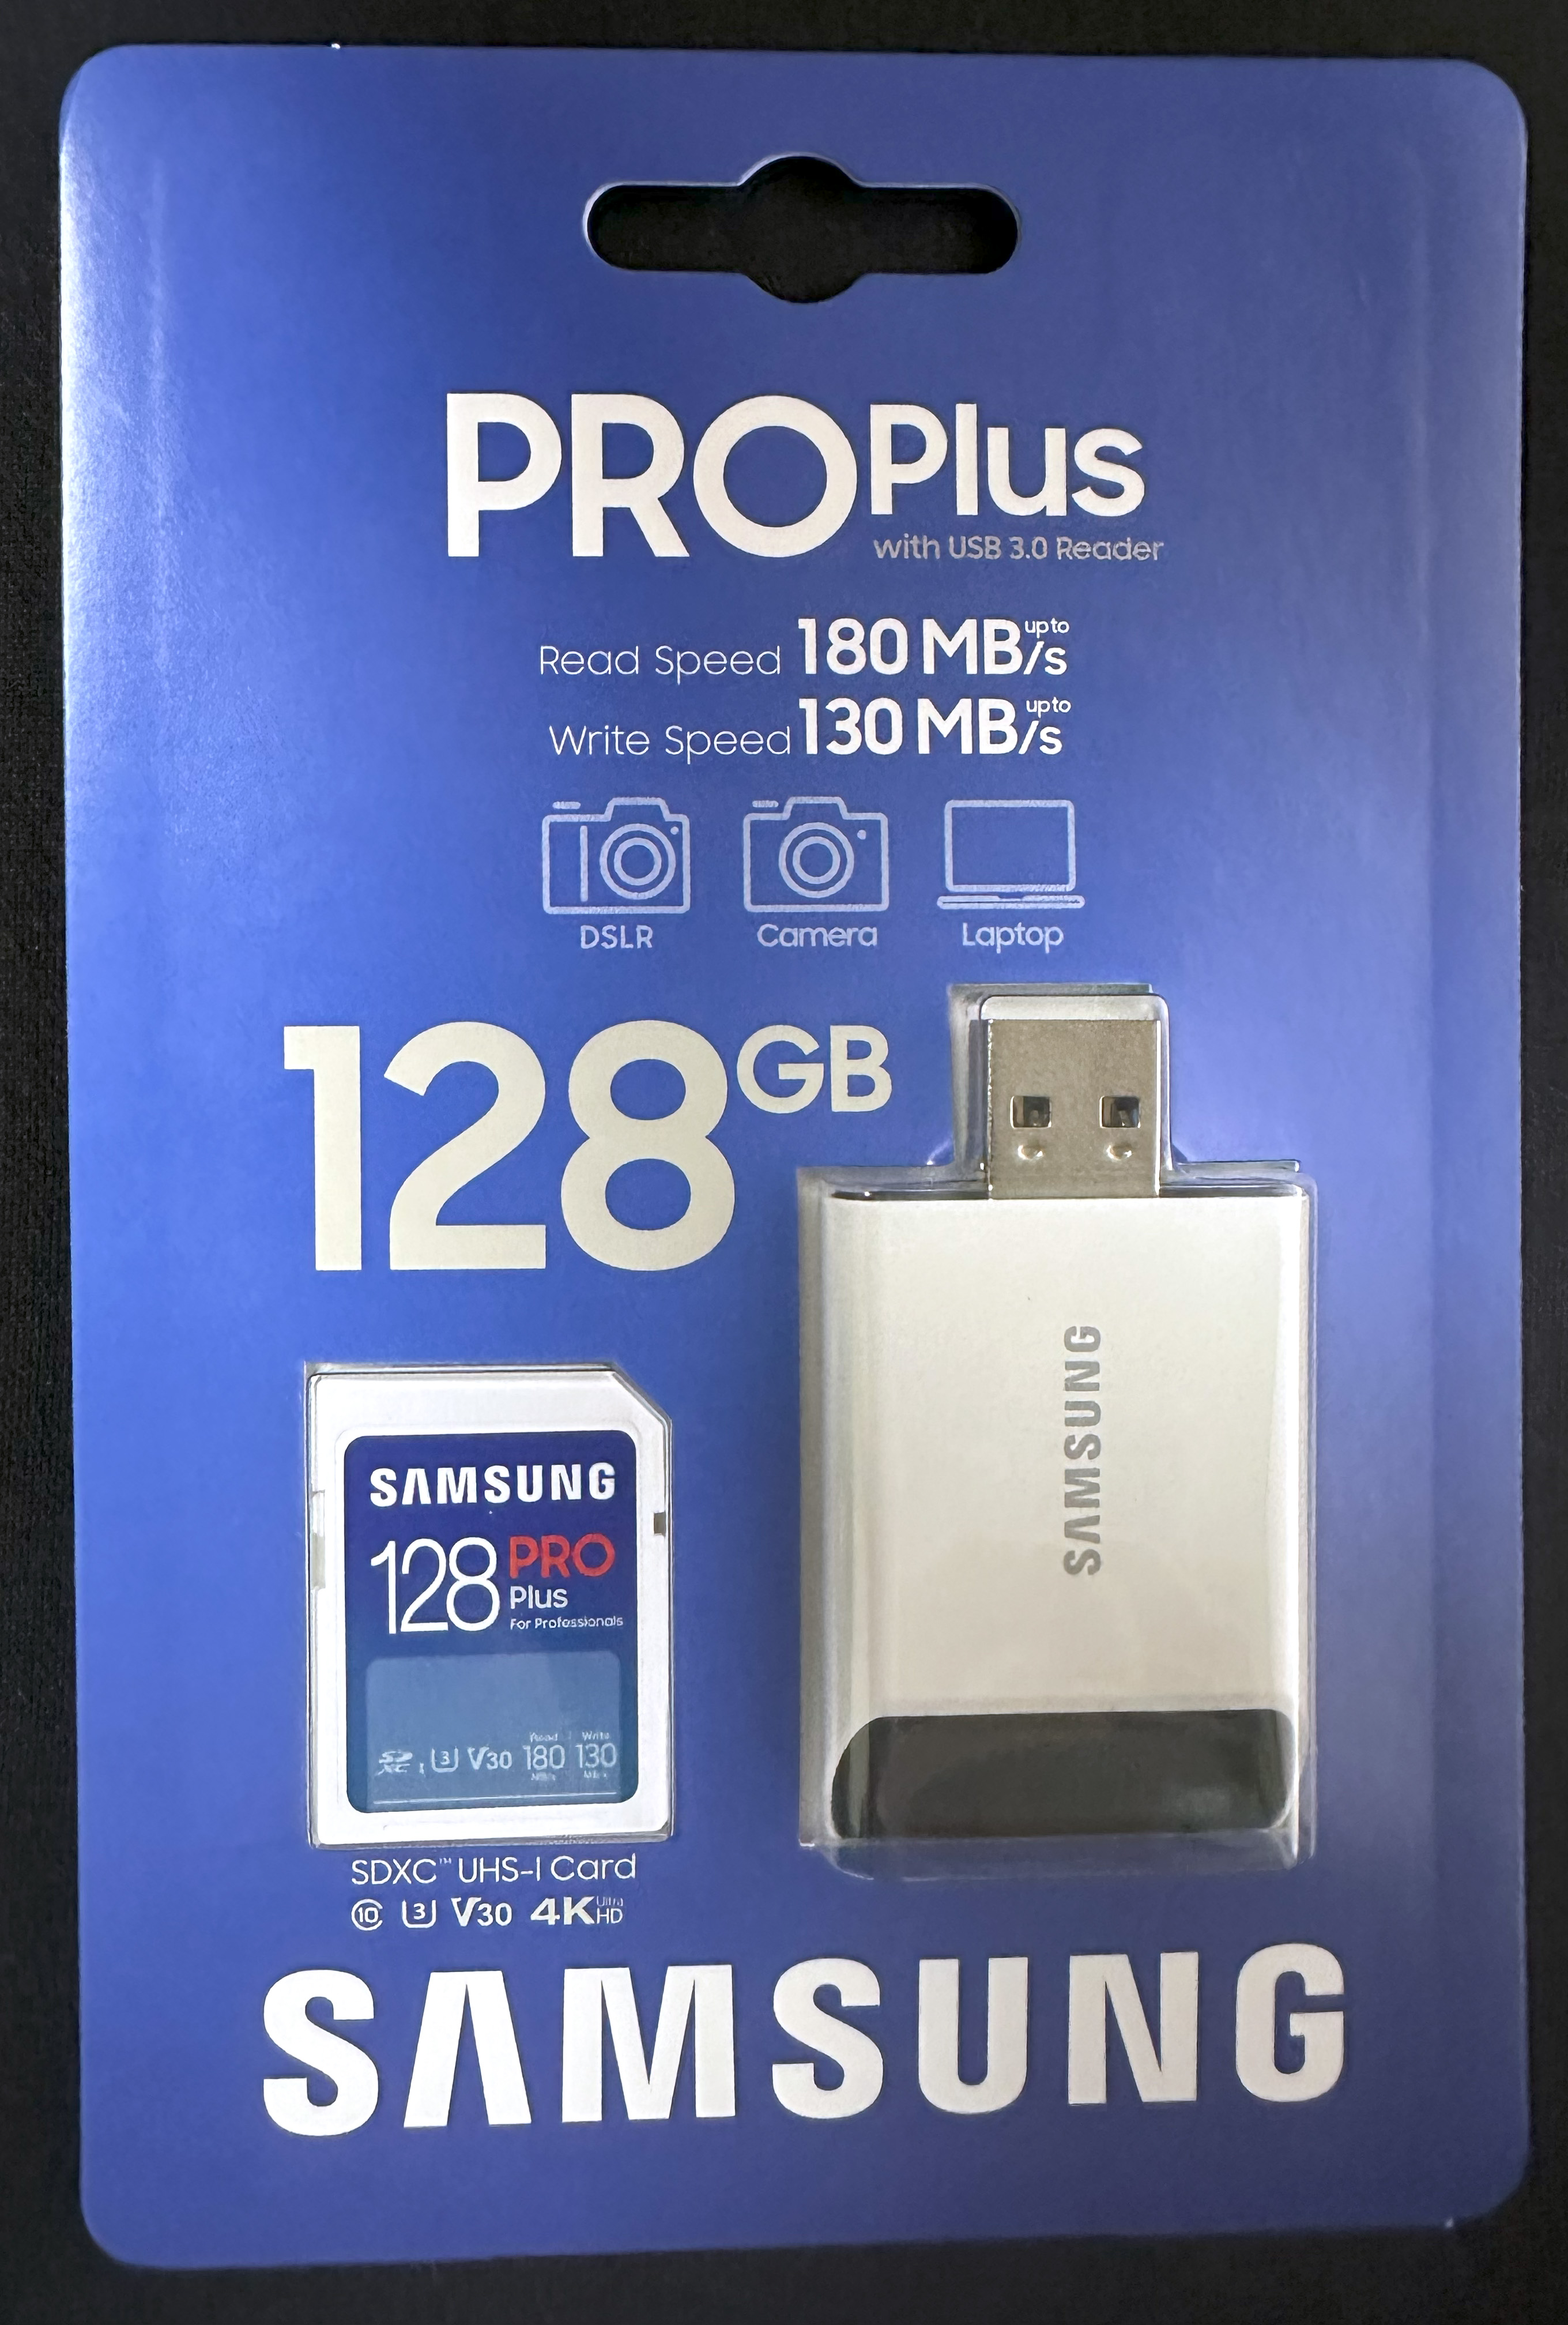 Samsung PRO Plus SDXC UHS-I 128GB with USB 3.0 Reader (MB-SD128SB/WW) Package Front